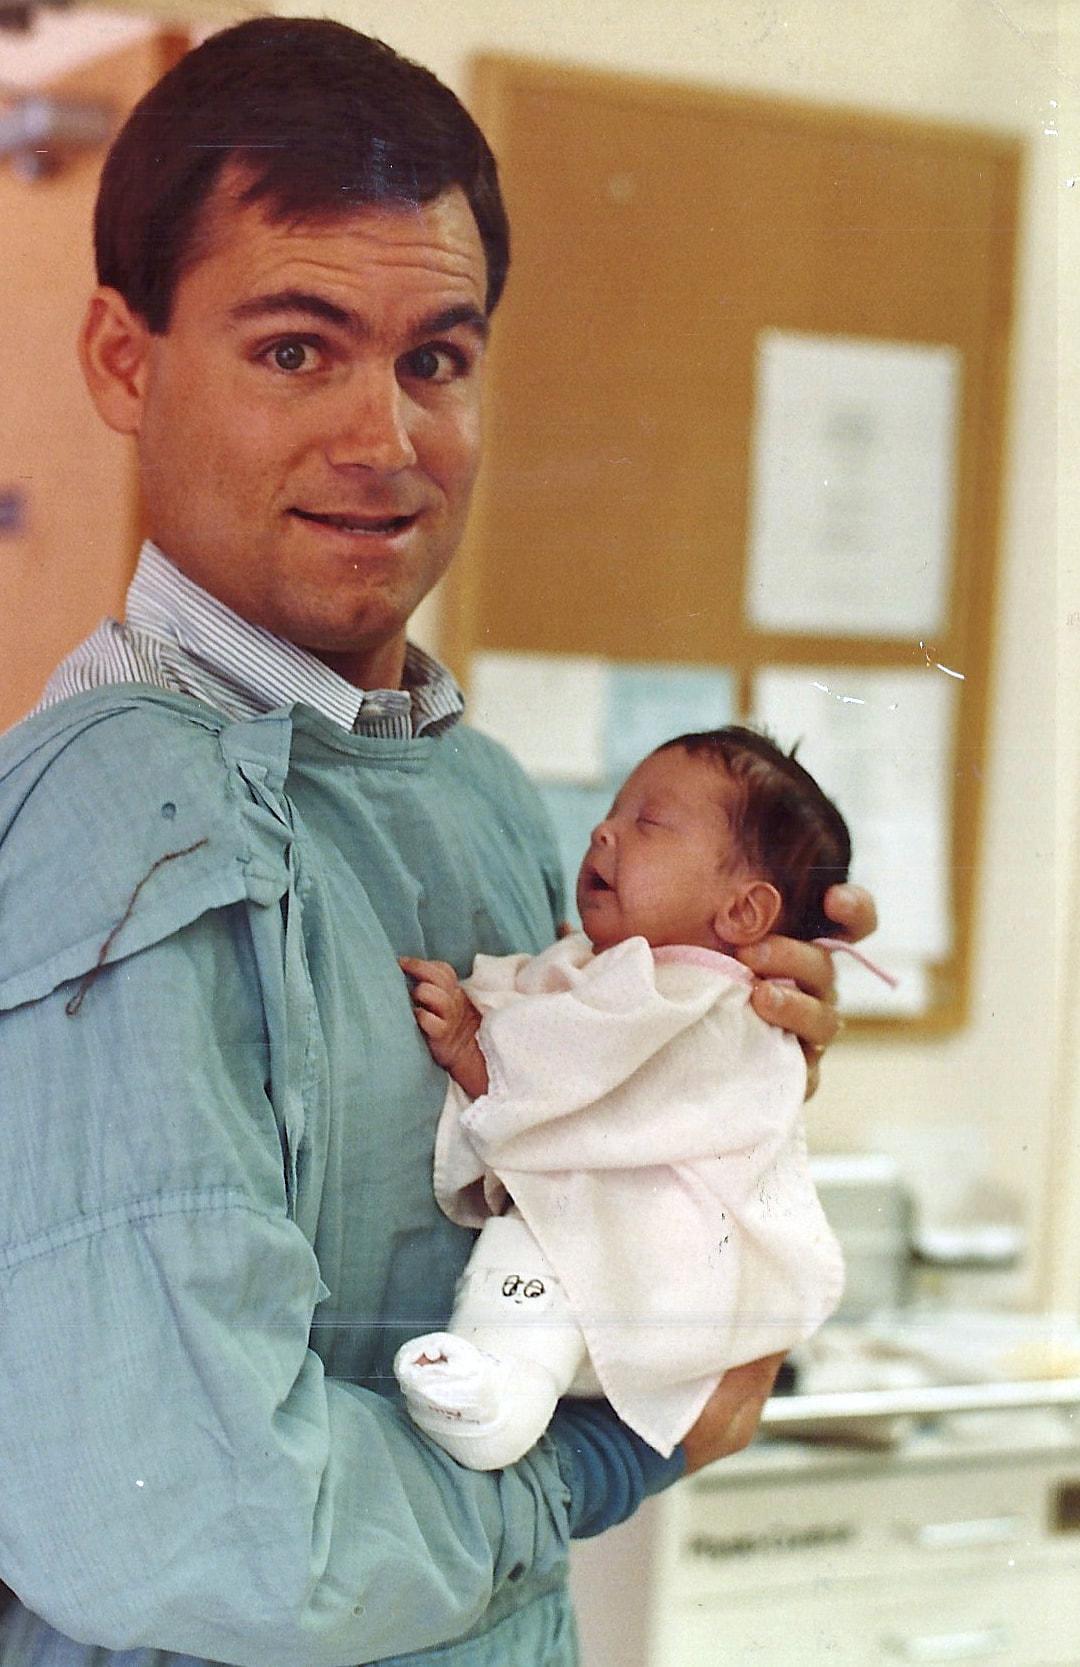 Baby Claire with her adoptive dad, Warren Culwell. (Courtesy of <a href="https://www.facebook.com/ClaireCulwell">Claire Culwell</a>)